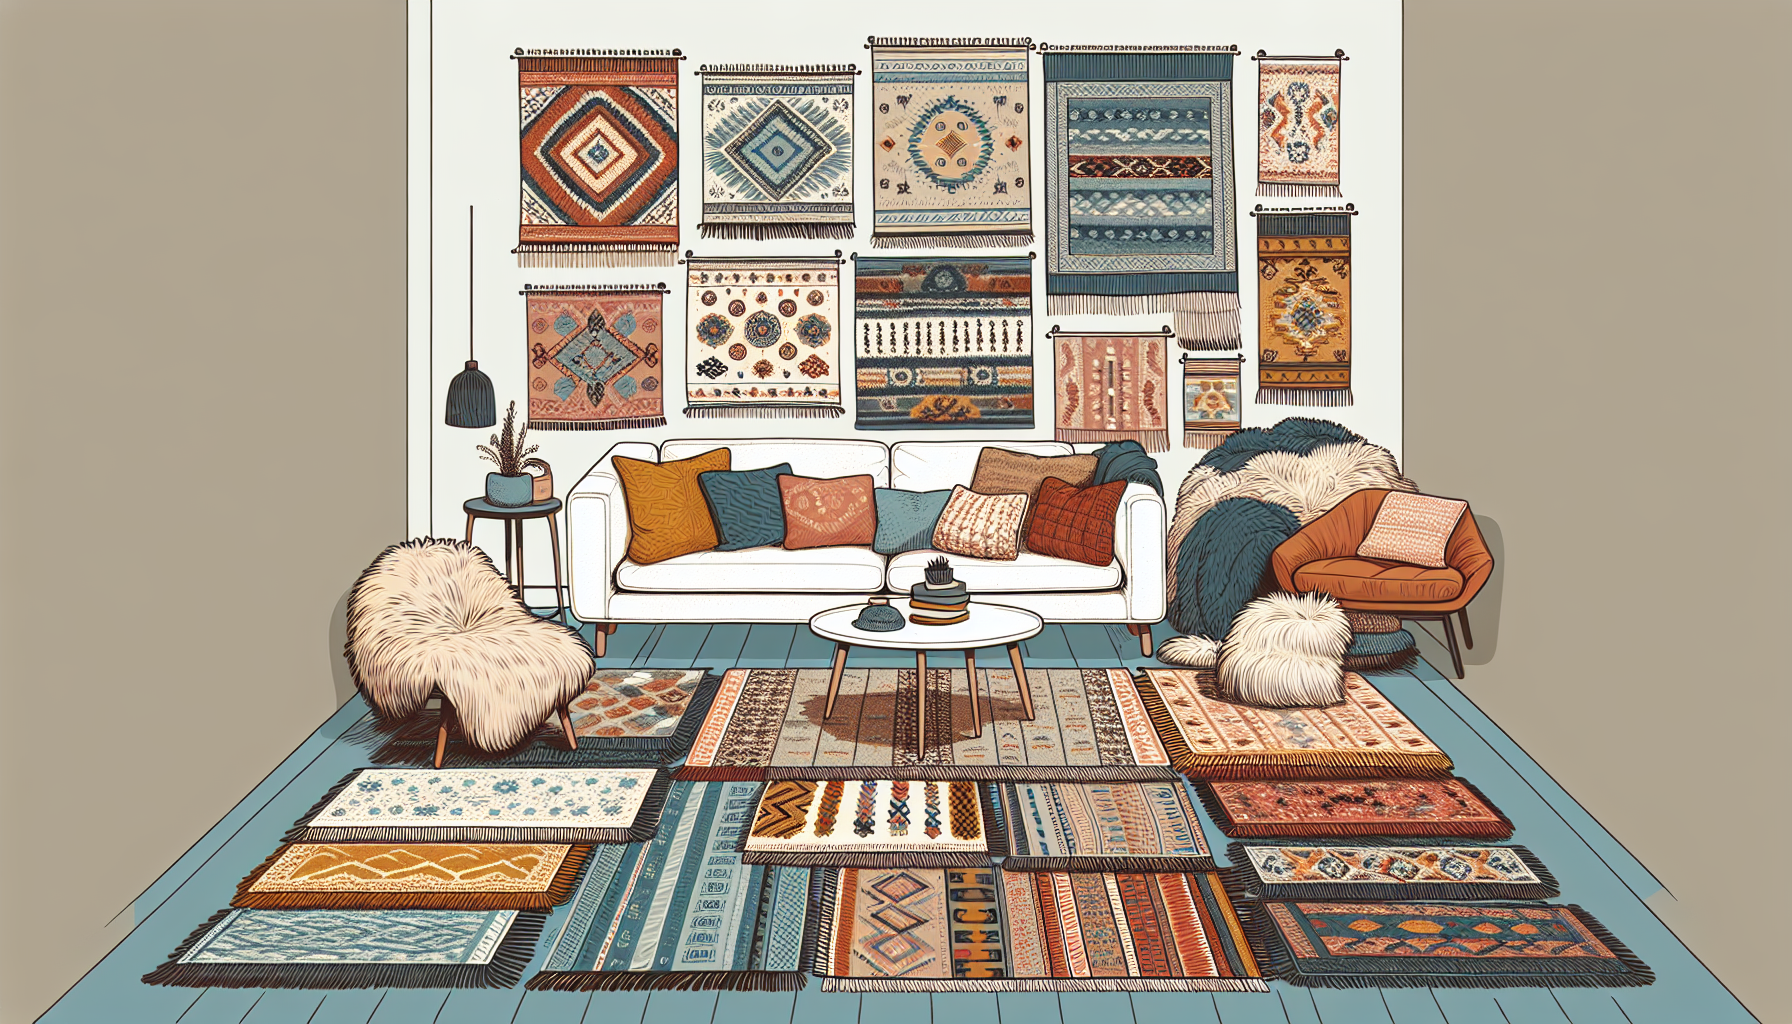 Layered rugs adding warmth and texture to a living space